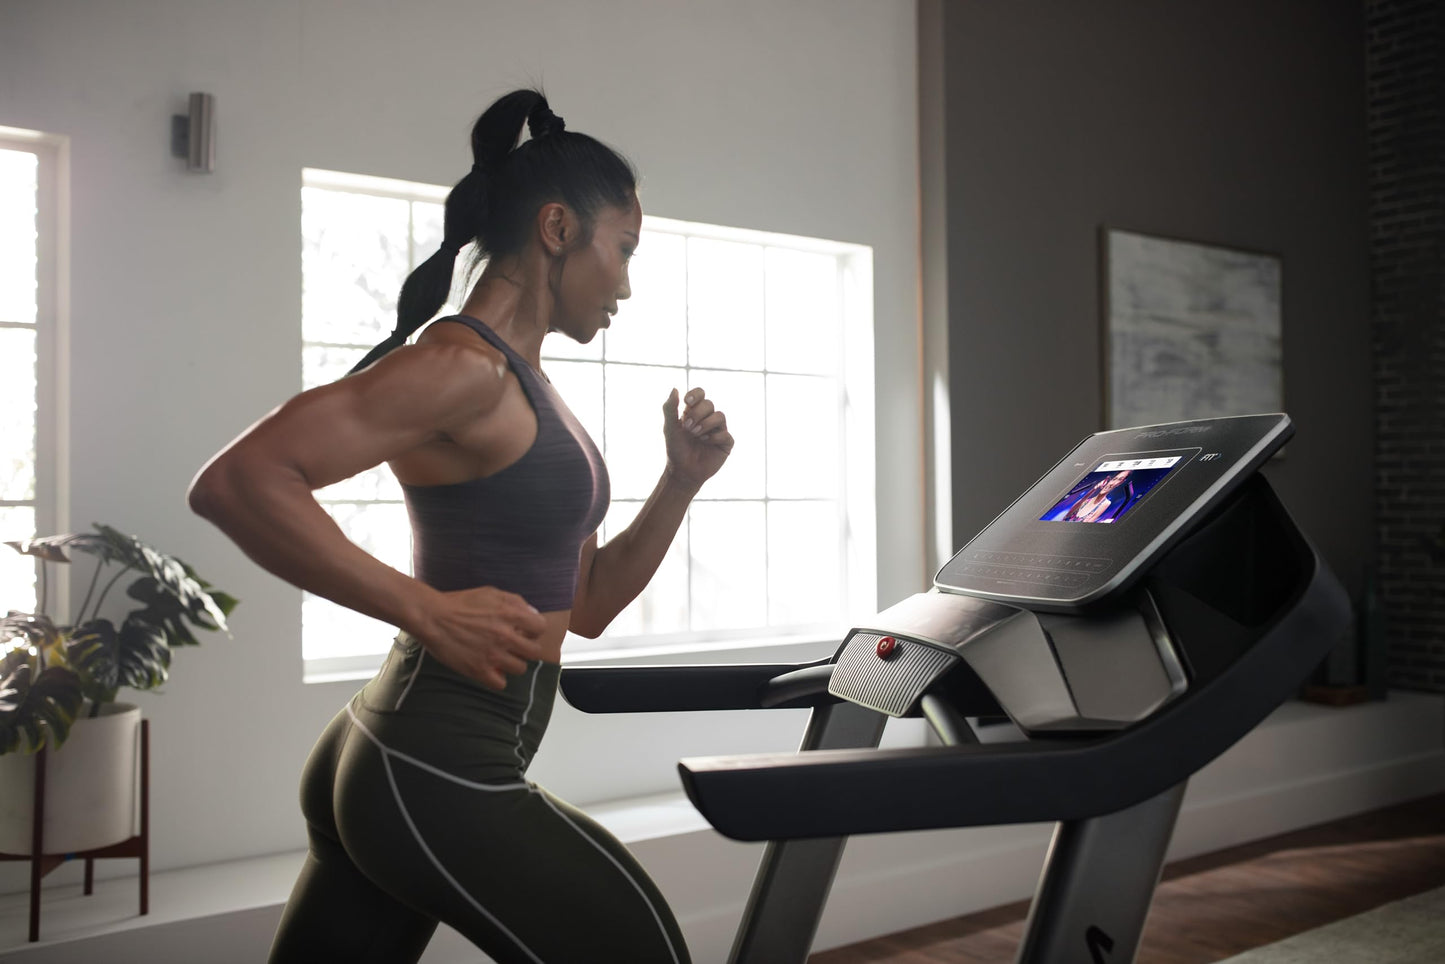 ProForm Pro 2000 Smart Treadmill with 10” HD Touchscreen Display and 30-Day iFIT Pro Membership